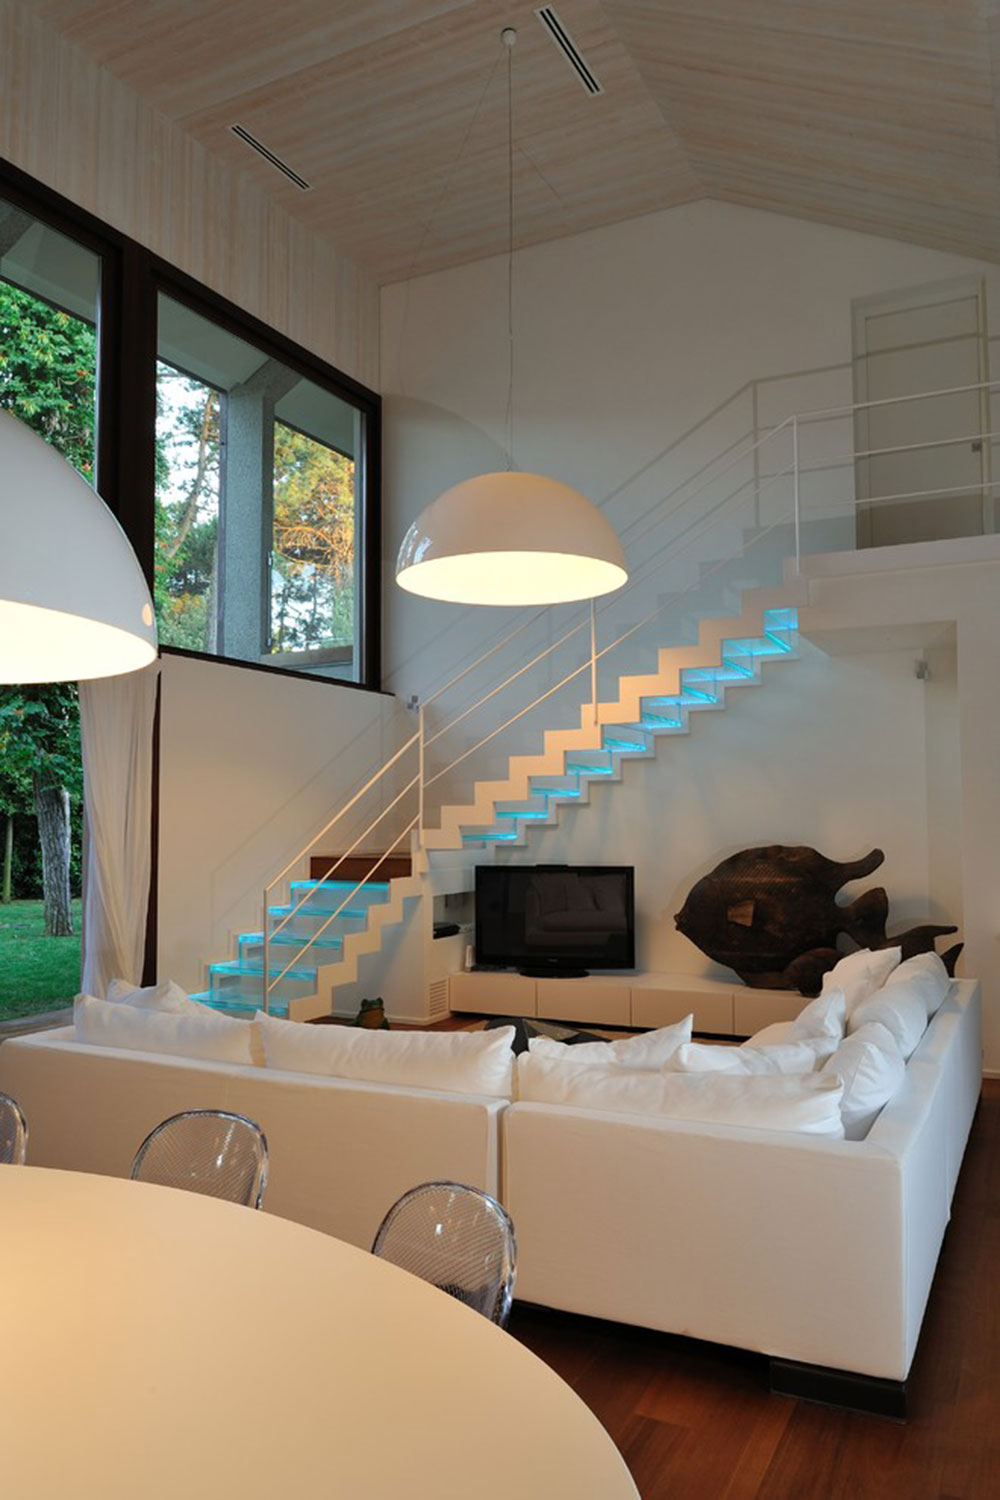 Modern-And-Exquisite-Floating-Staircase13 Modern And Exquisite Floating Staircase Designs